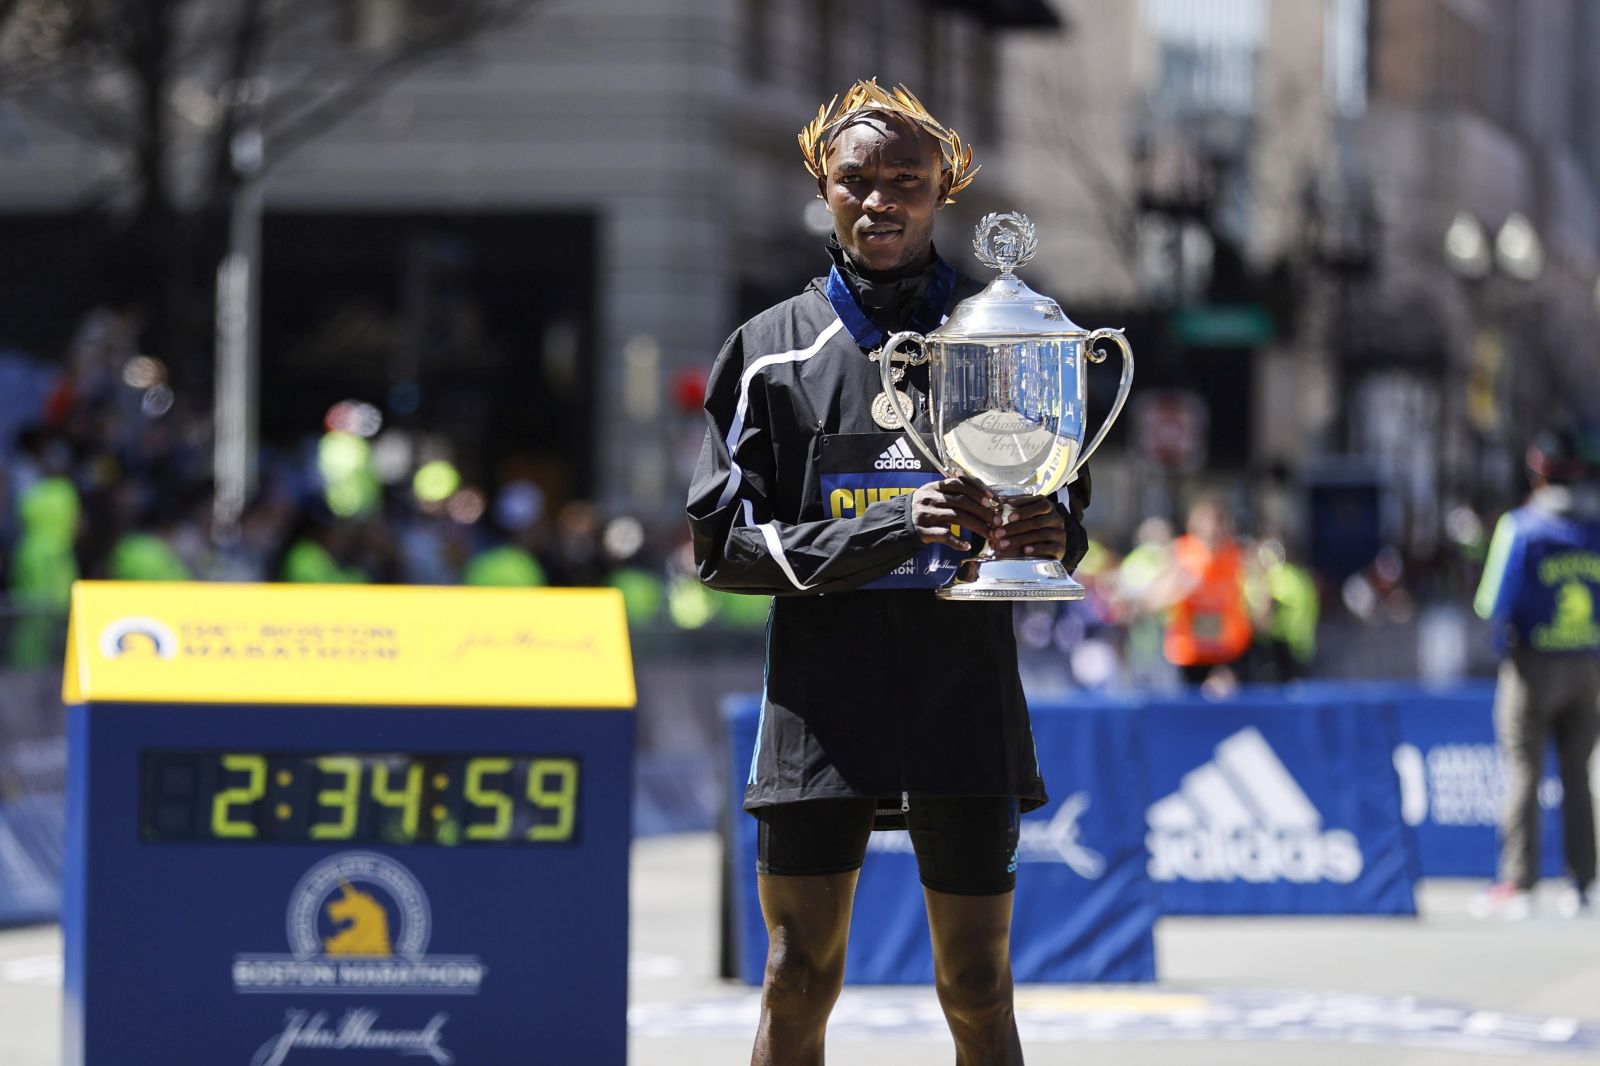 epa09896154 Evans Chebet of Kenya holds up a trophy after winning the Men’s Division of the 126th Boston Marathon, in Boston, Massachusetts, USA, 18 April 2022. This is the first time since the beginning of the pandemic that the Boston Marathon, the worlds oldest annual marathon, was held on the traditional date in April.  EPA/CJ GUNTHER